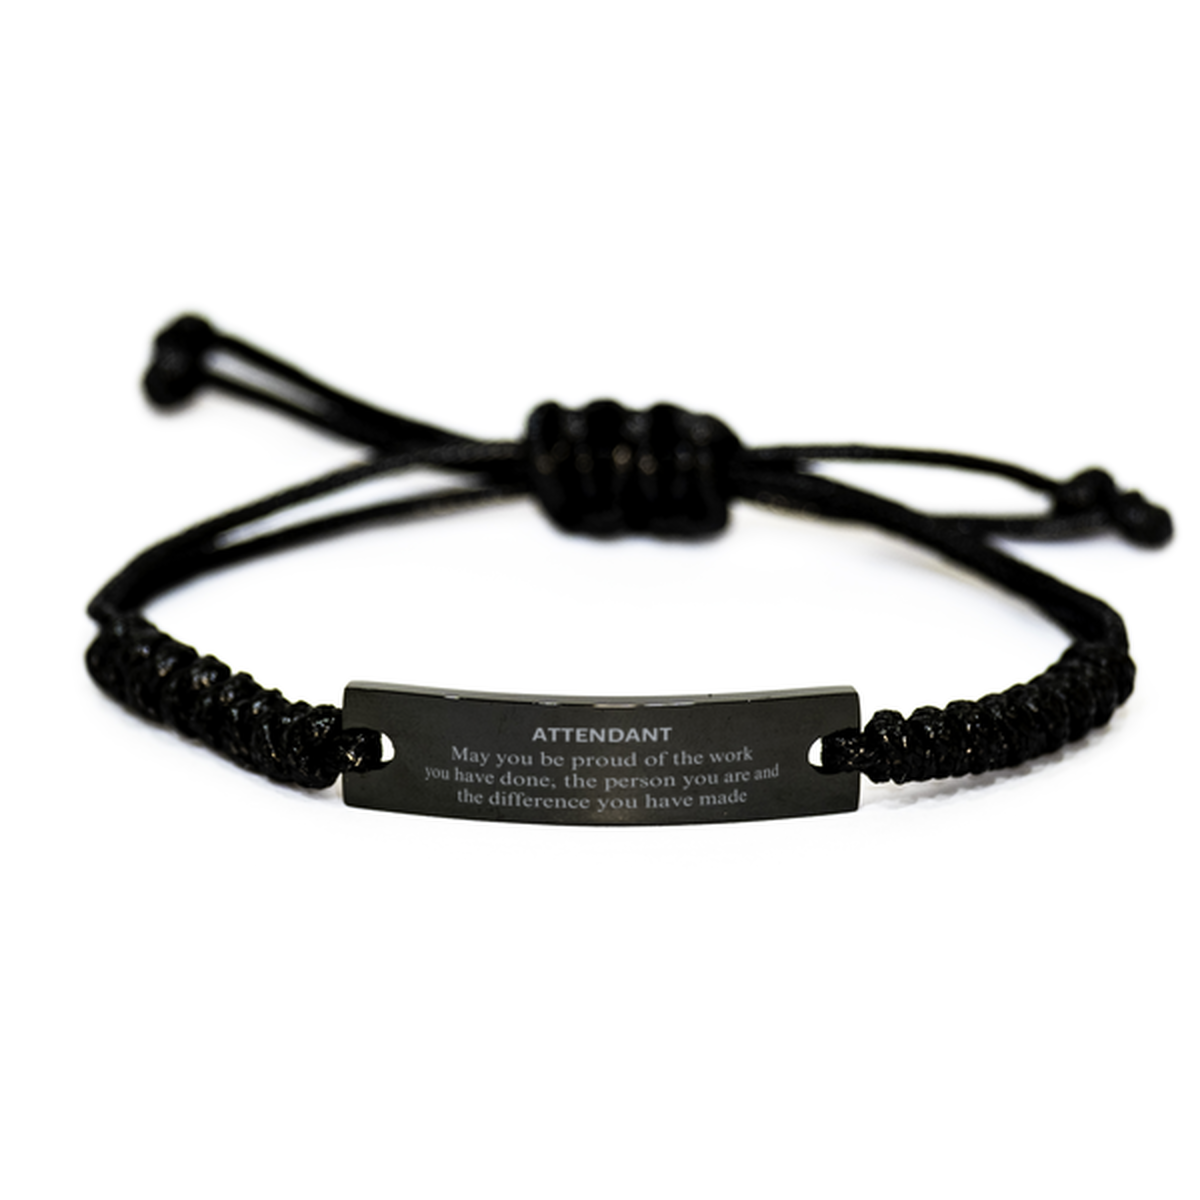 Attendant May you be proud of the work you have done, Retirement Attendant Black Rope Bracelet for Colleague Appreciation Gifts Amazing for Attendant